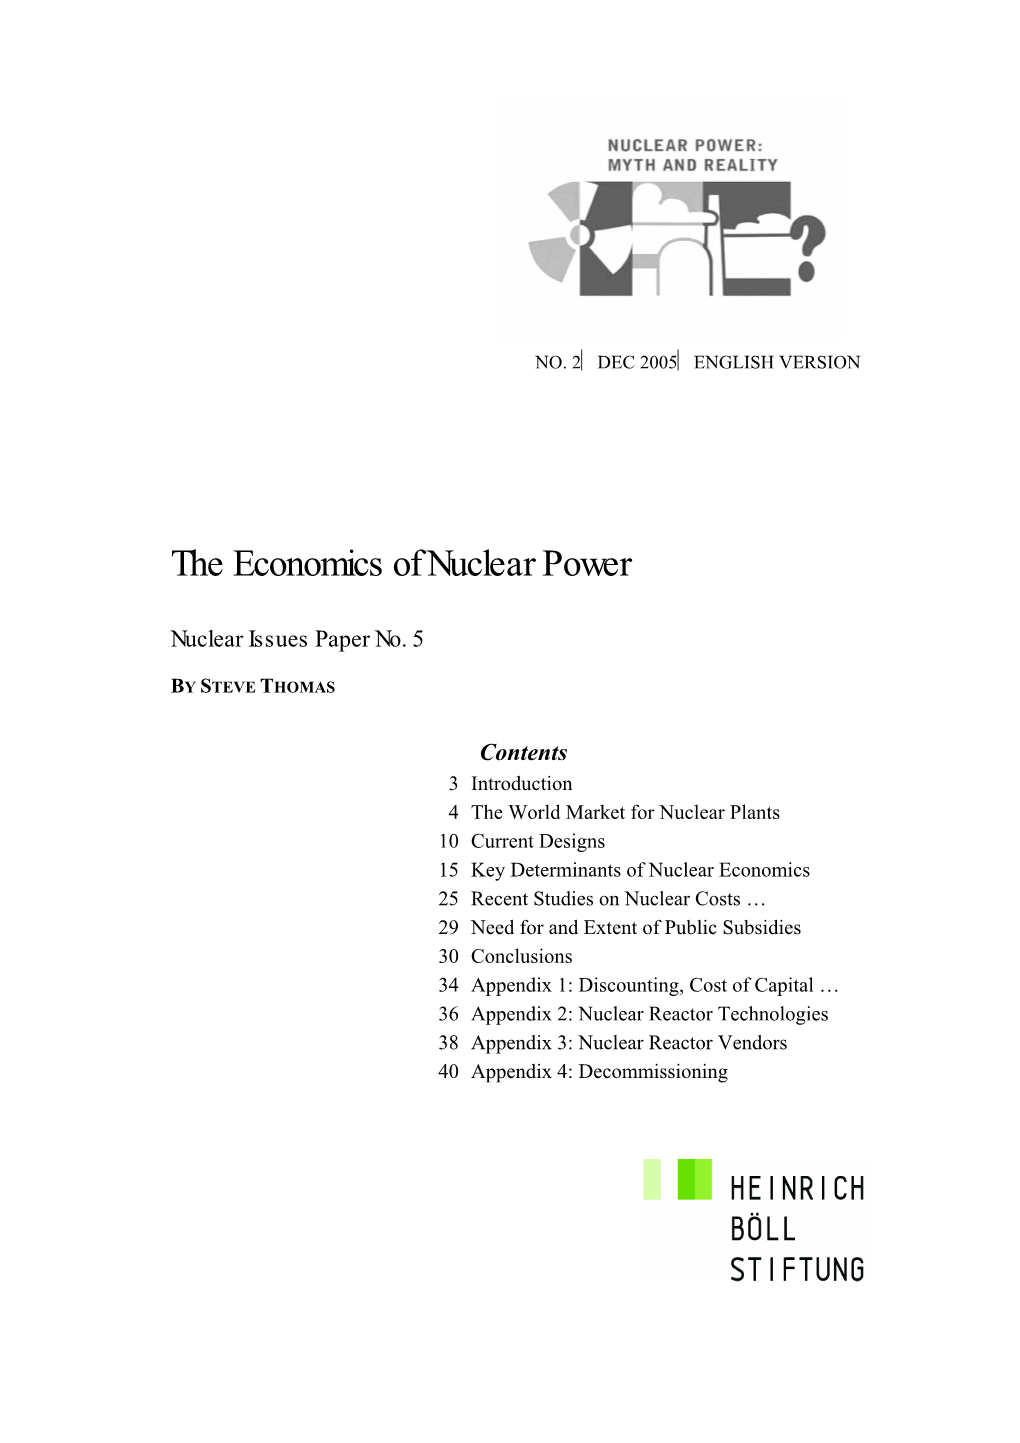 The Economics of Nuclear Power